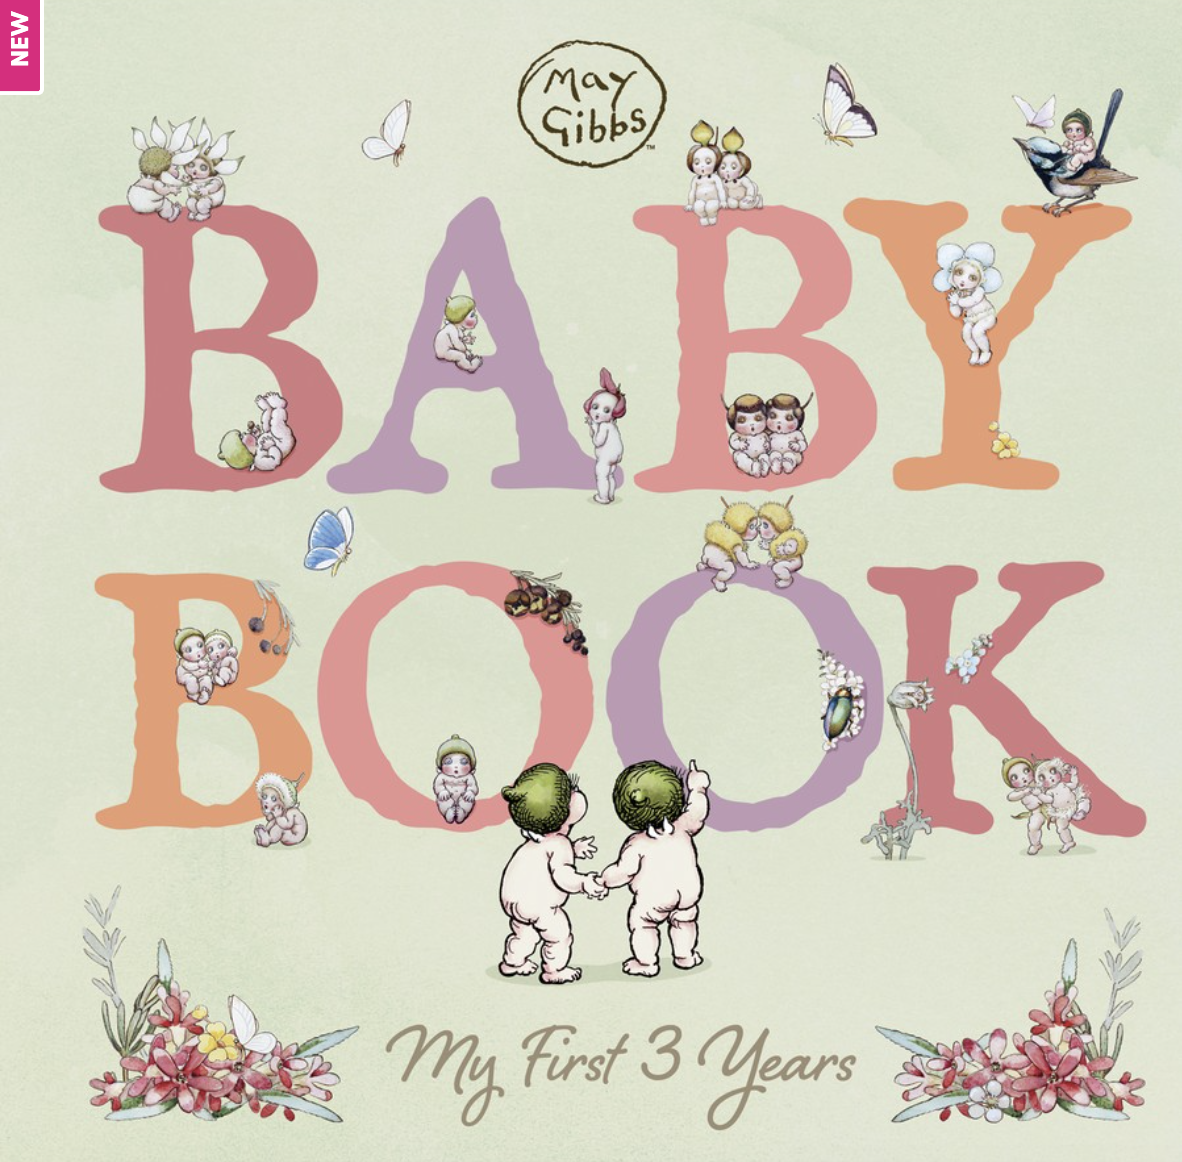 Baby Book: My First 3 Years by May Gibbs